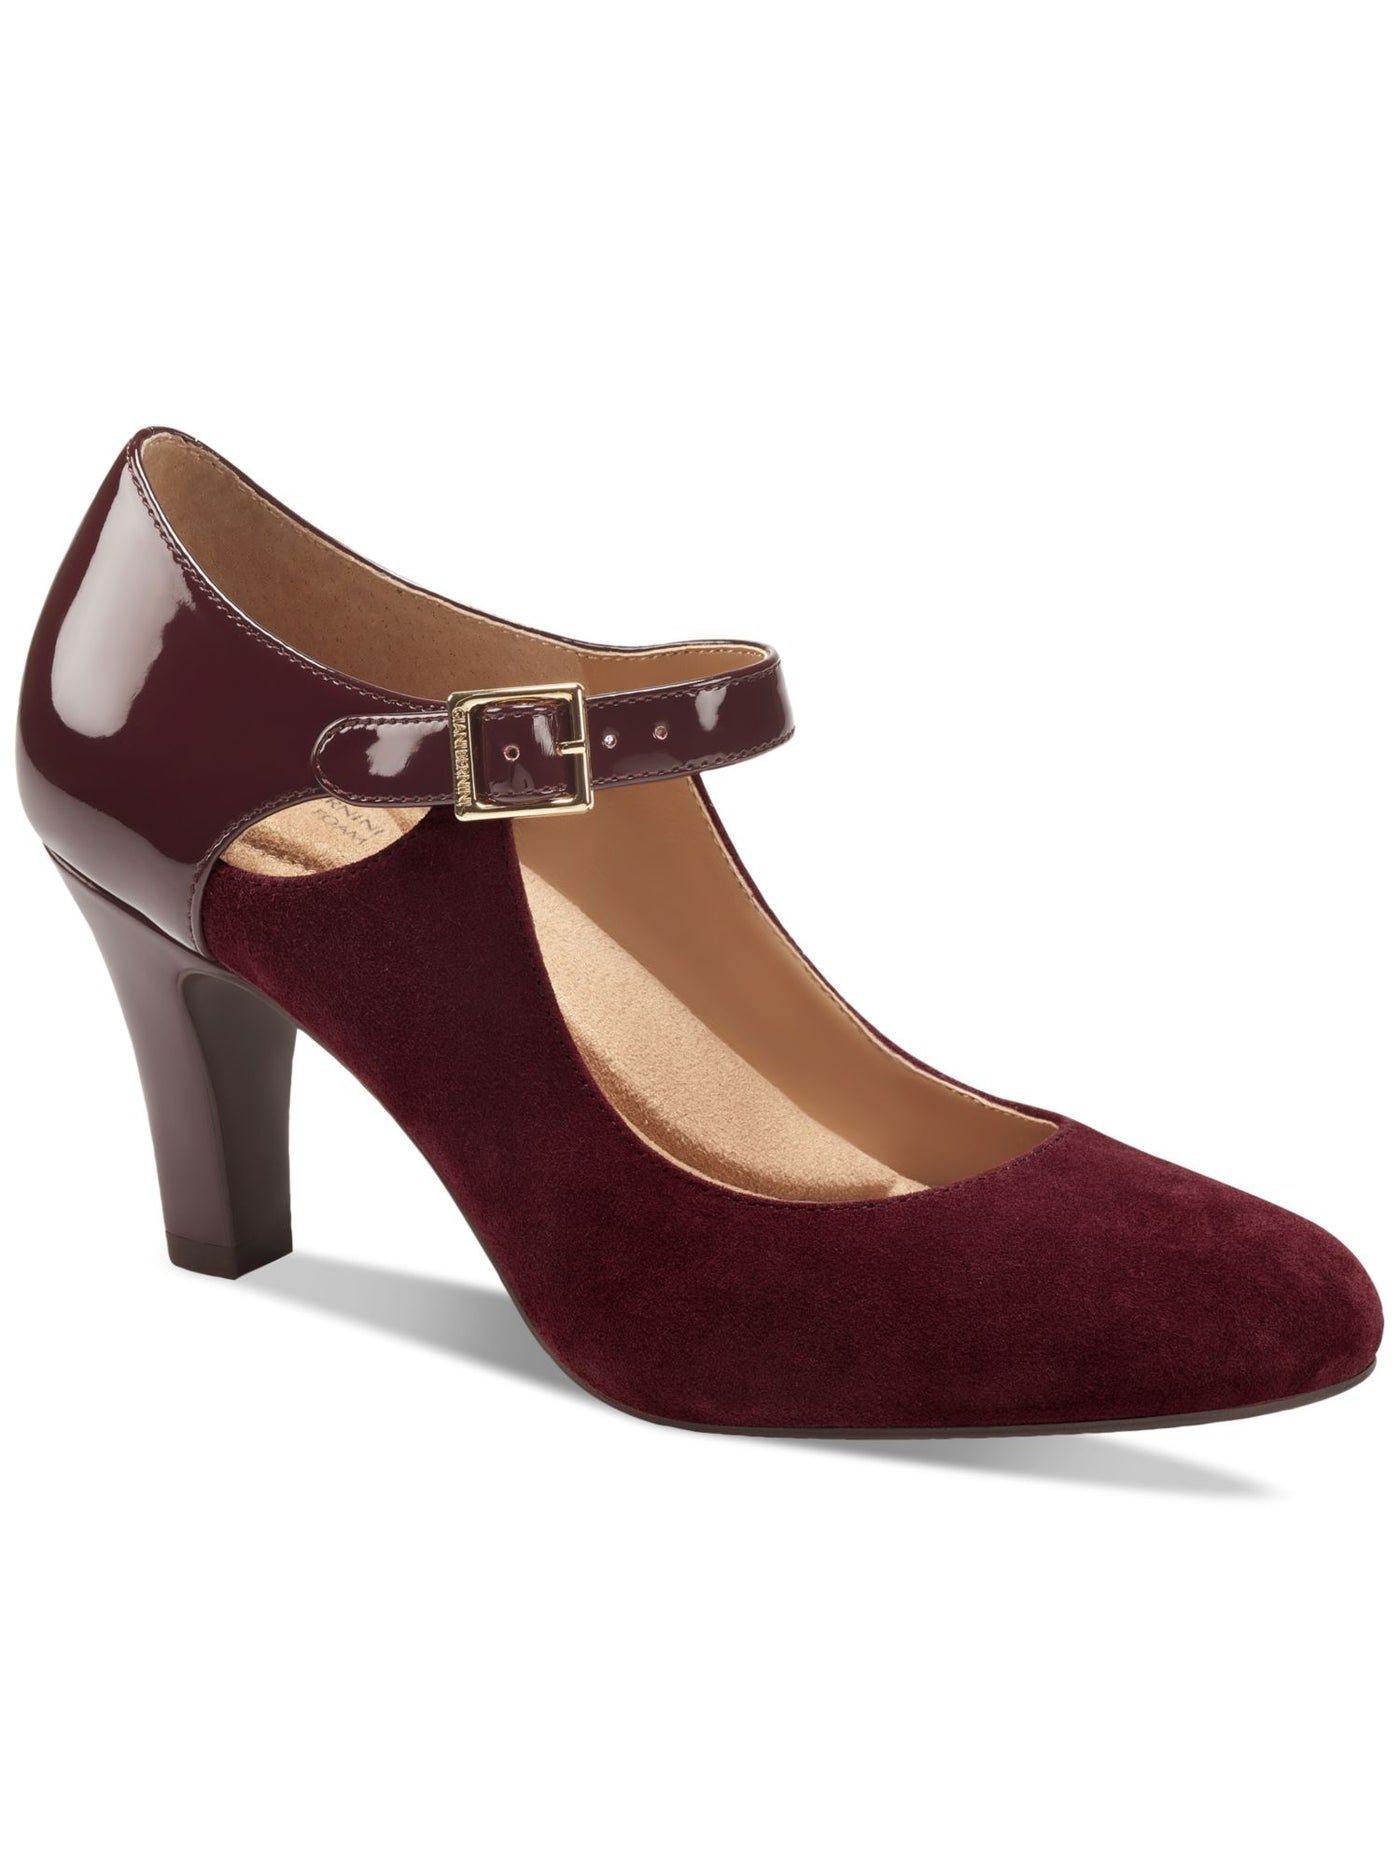 GIANI BERNINI Womens Burgundy Mixed Media Mary Jane Cut Out Cushioned Ankle Strap Arch Support Velmah Round Toe Block Heel Buckle Leather Pumps Shoes 12 M